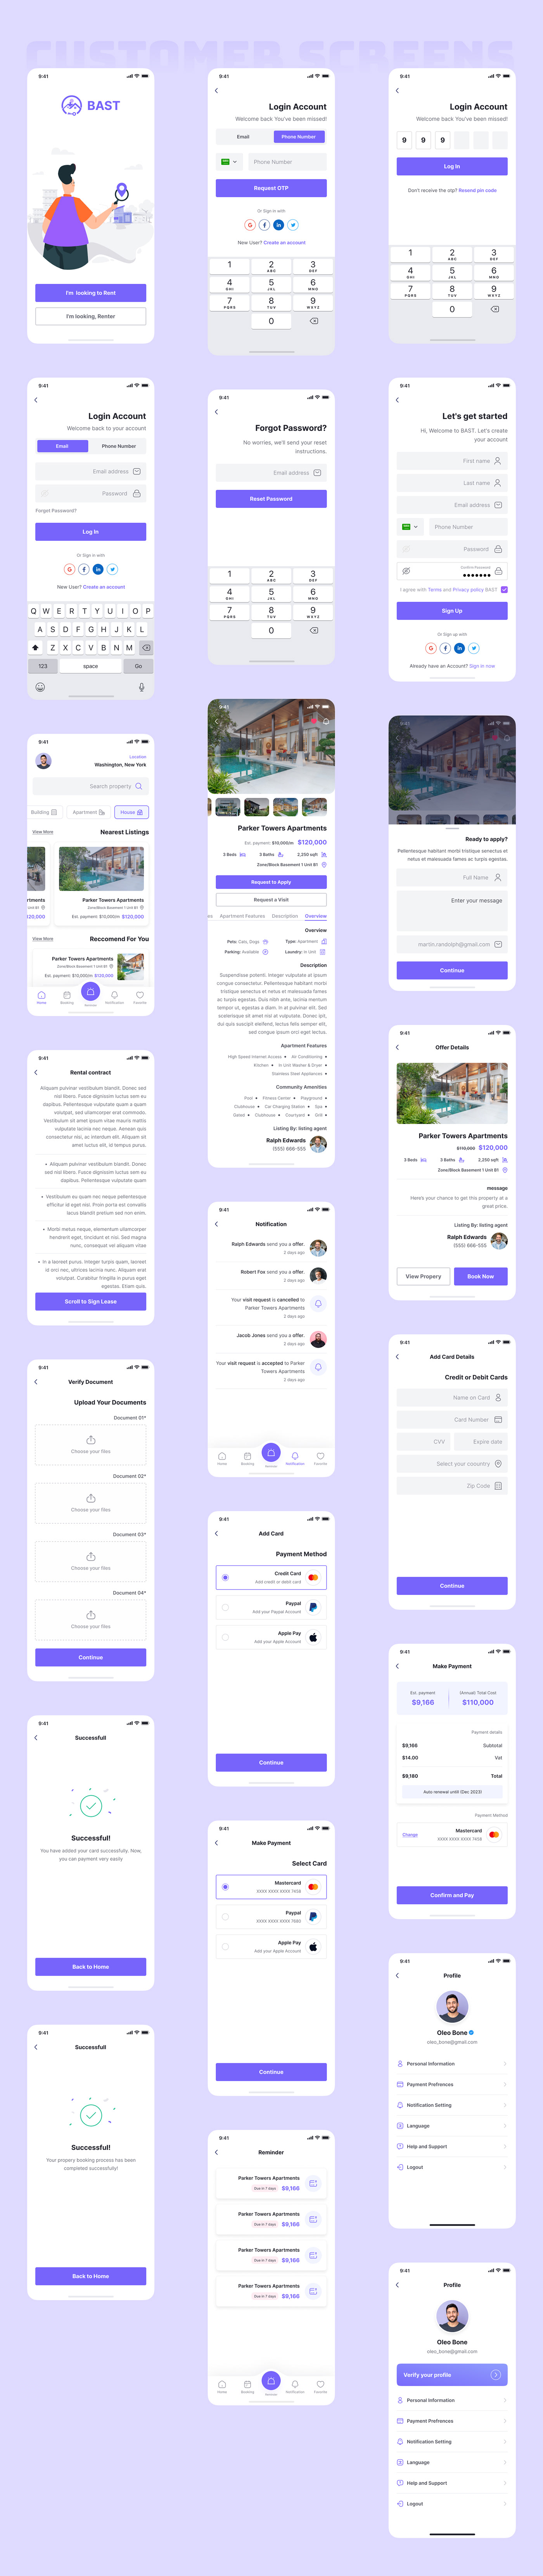 Clean UI Afterpay tabby mobile design Mobile apps iOS design buy now pay later illustration art installment rent installments app